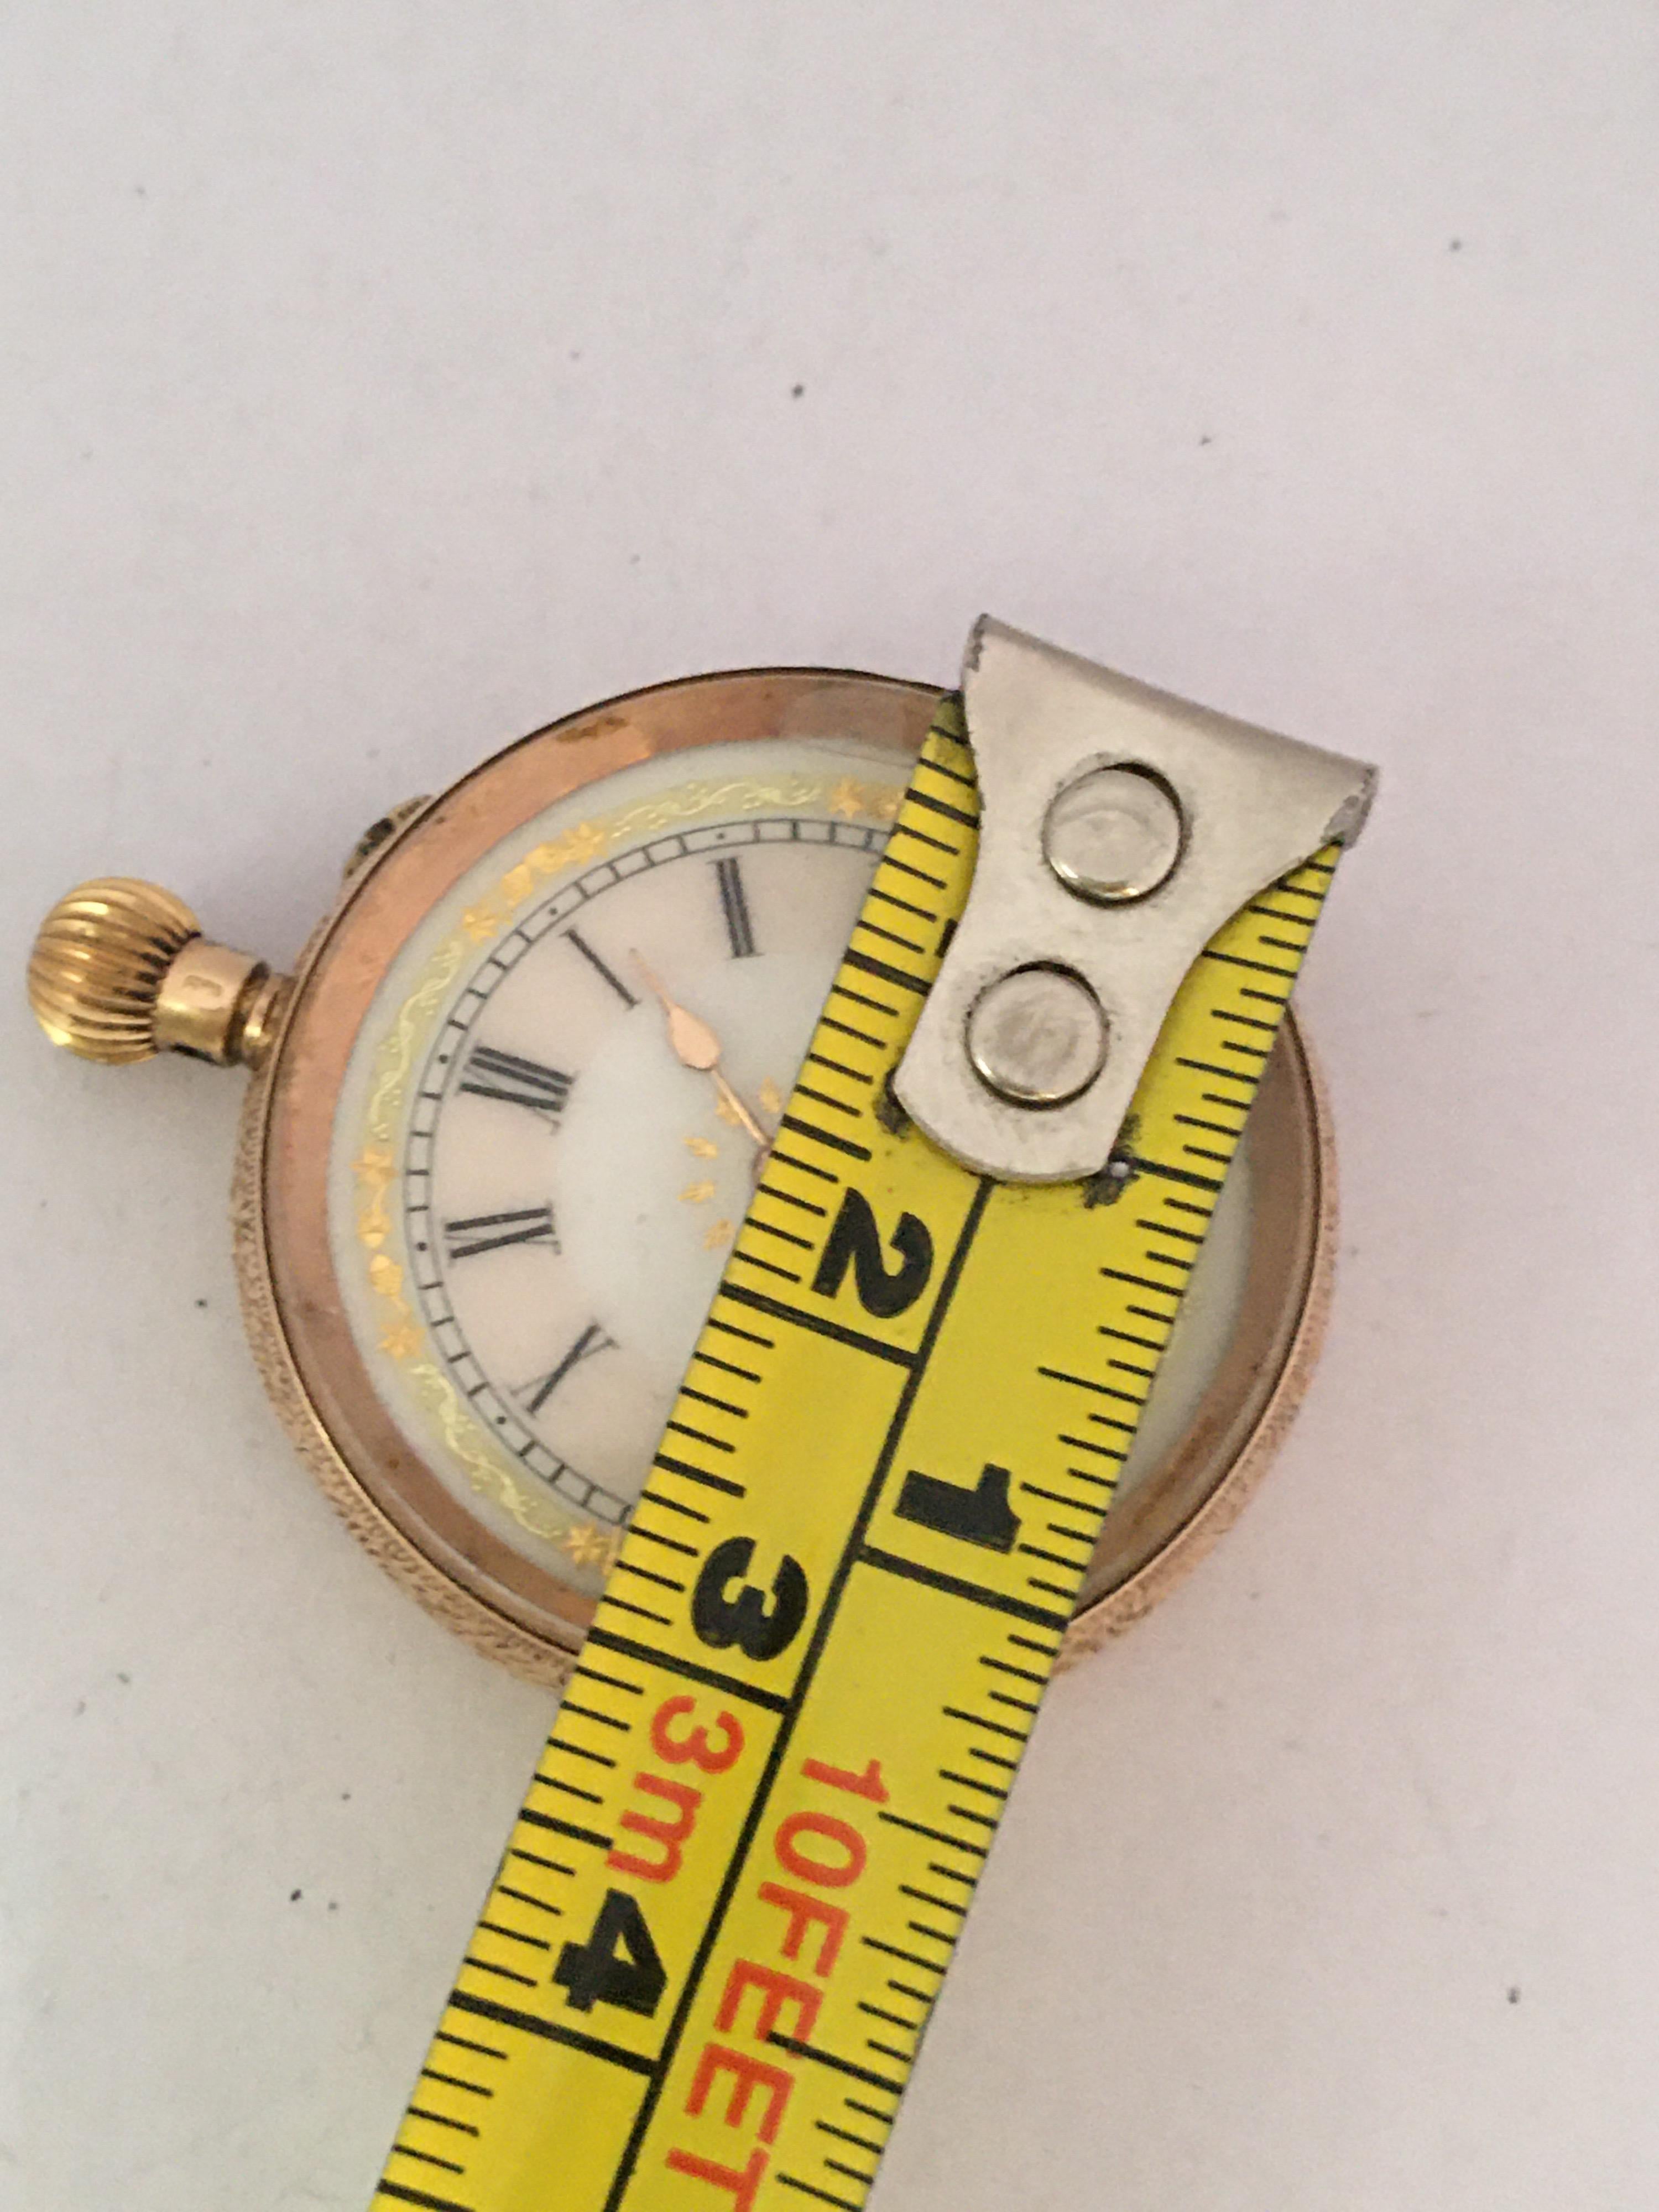 14 Karat Gold Antique Pin Set and Hand Winding Ladies Fob / Pocket Watch In Fair Condition For Sale In Carlisle, GB